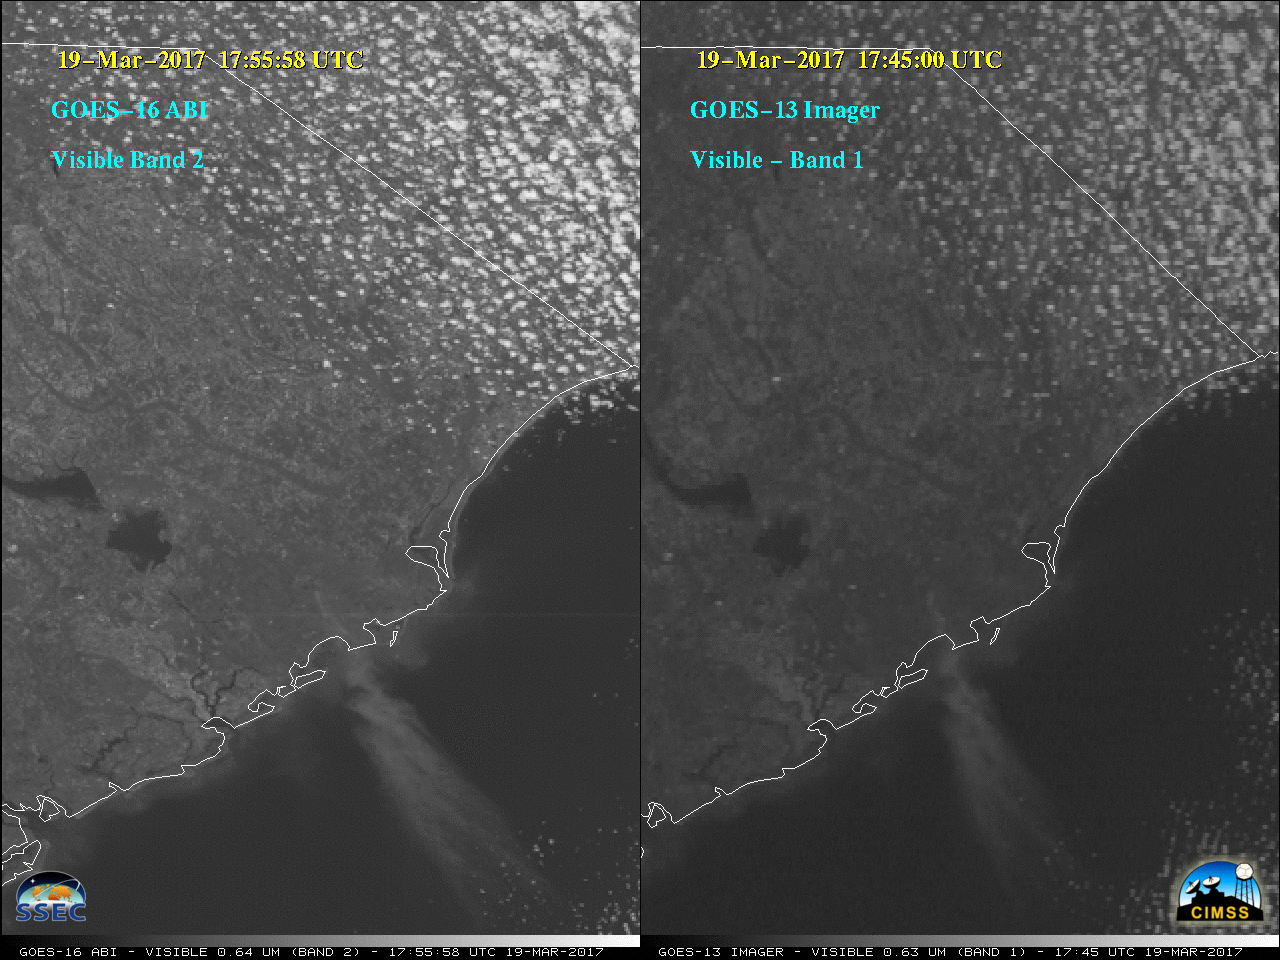 GOES-16 Visible (0.64 µm, left) and GOES-13 Visible (0.63 µm, right) images [click to play MP4 animation]